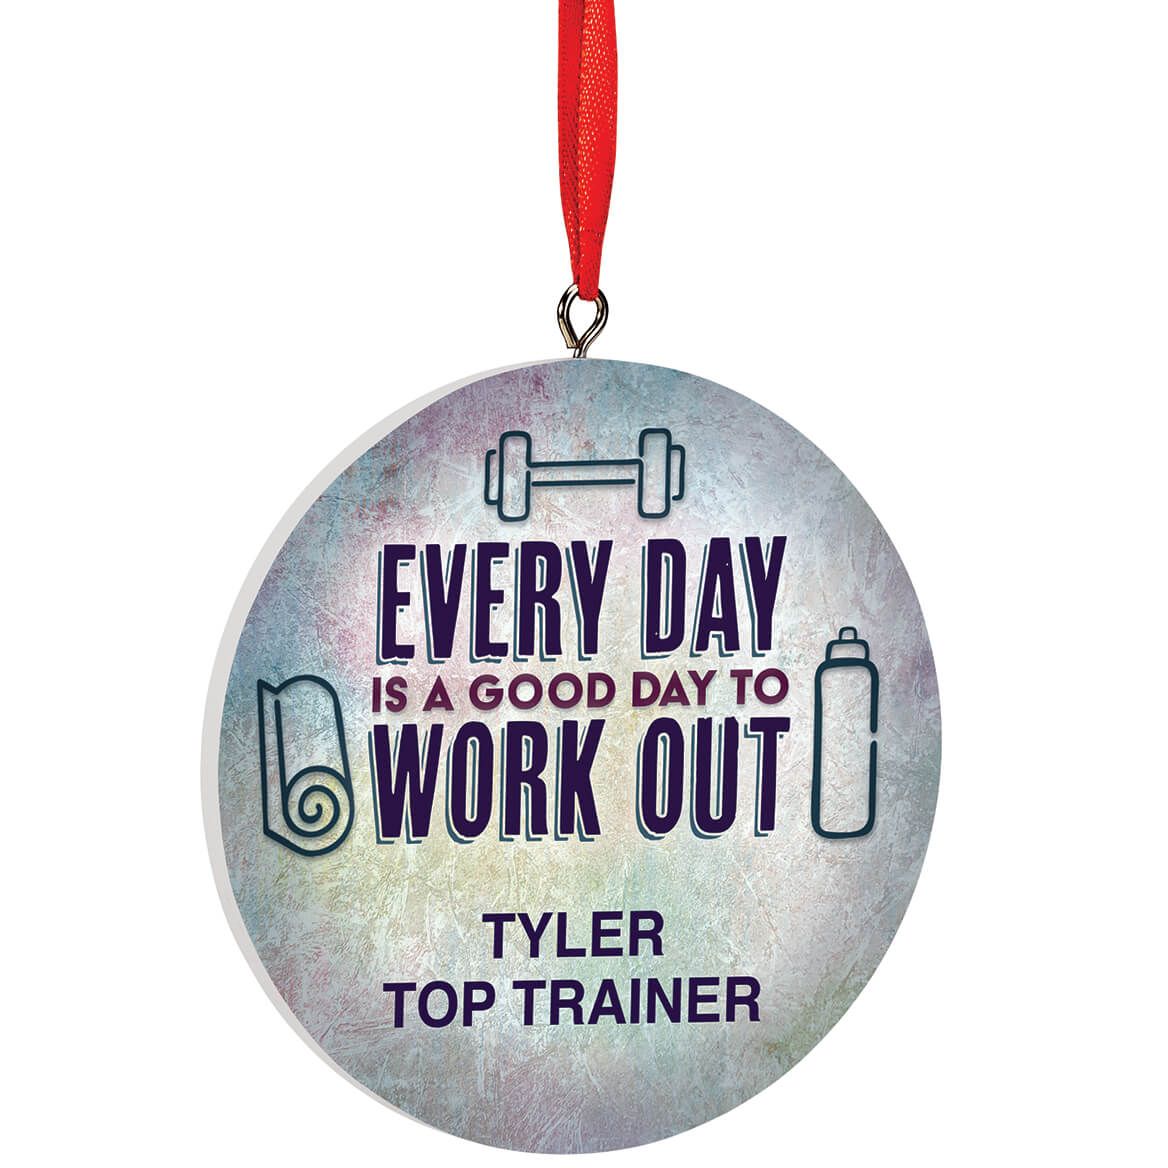 Personalized Work Out Ornament + '-' + 372984